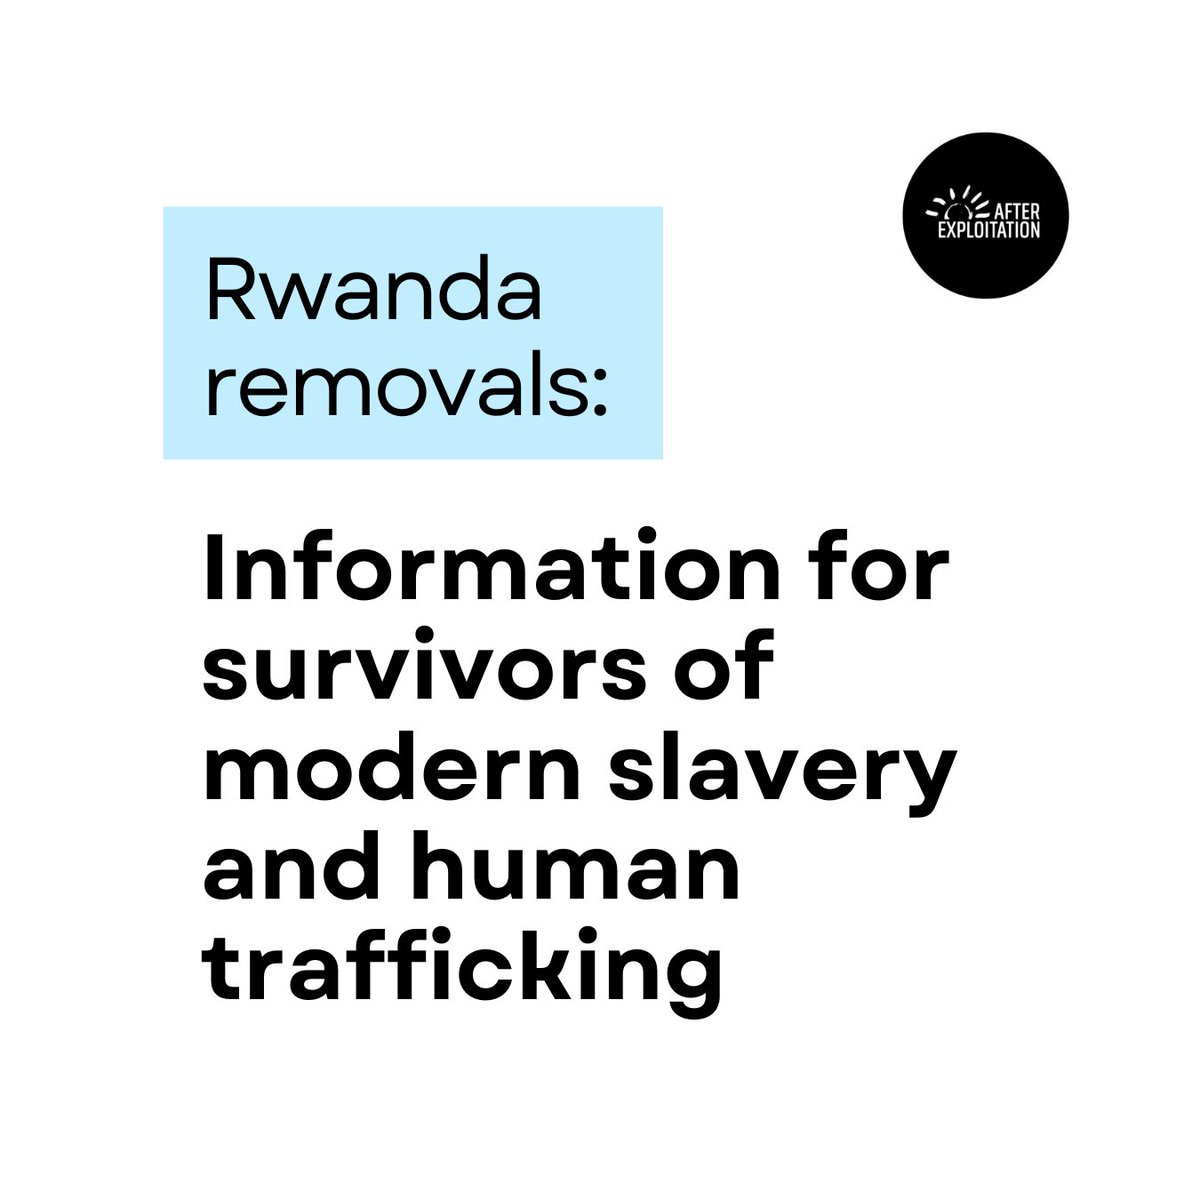 We have compiled info on Rwanda removals for survivors of modern slavery + human trafficking who are worried they may be affected or need to know their options: afterexploitation.com/2024/05/09/rwa… Thank you to @SoniaL77 of @freemovementlaw for supporting